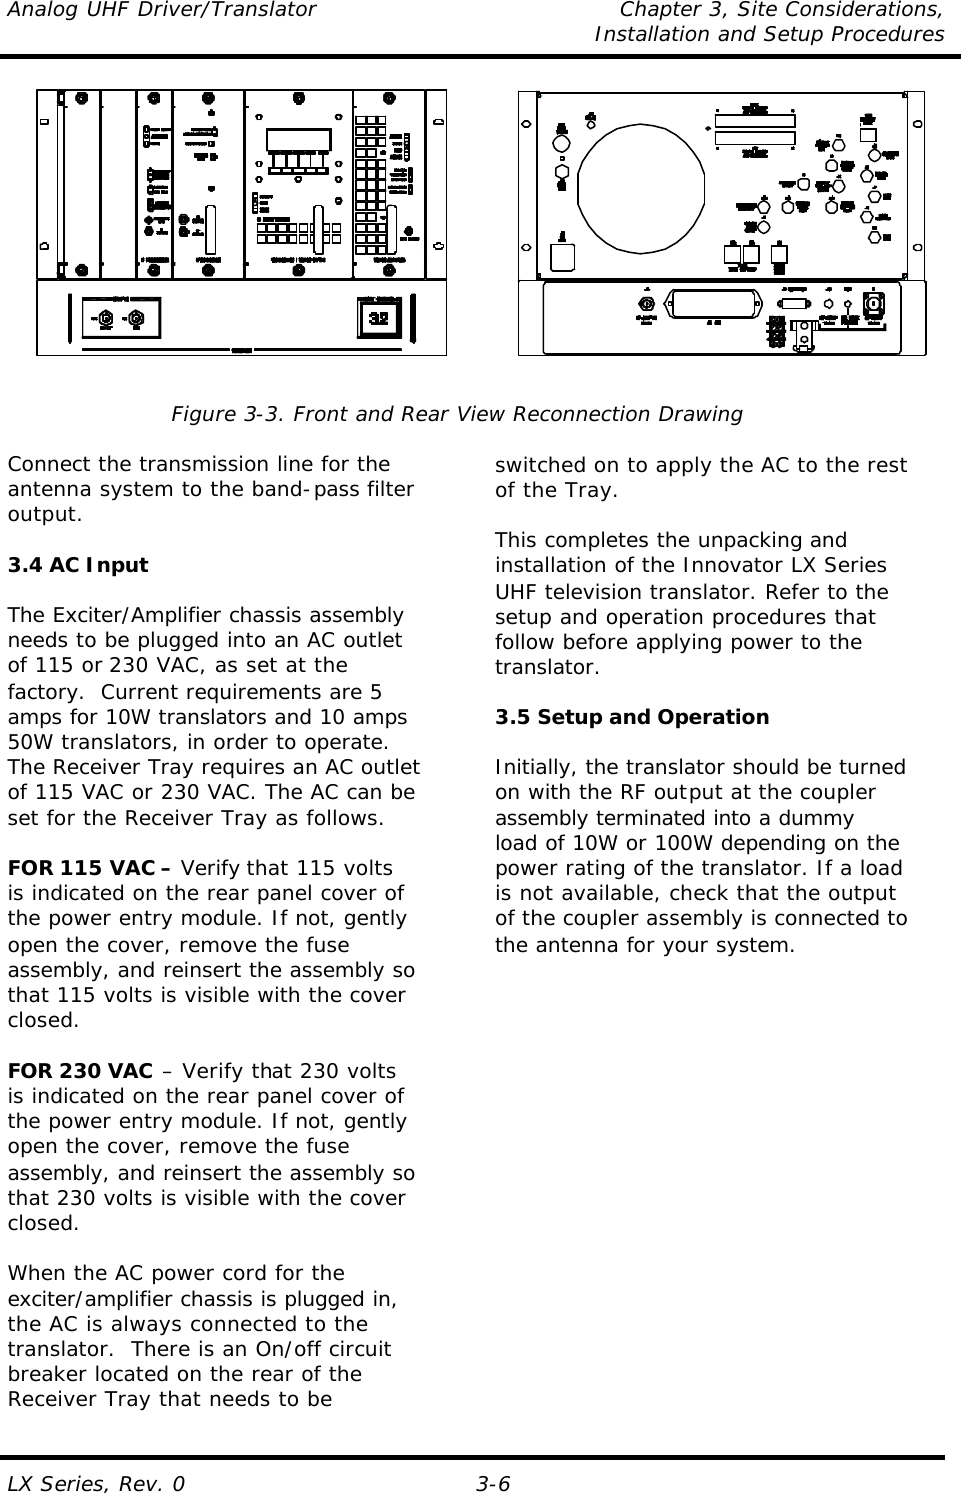 Analog UHF Driver/Translator Chapter 3, Site Considerations,   Installation and Setup Procedures  LX Series, Rev. 0 3-6             Figure 3-3. Front and Rear View Reconnection Drawing  Connect the transmission line for the antenna system to the band-pass filter output.   3.4 AC Input  The Exciter/Amplifier chassis assembly needs to be plugged into an AC outlet of 115 or 230 VAC, as set at the factory.  Current requirements are 5 amps for 10W translators and 10 amps 50W translators, in order to operate.  The Receiver Tray requires an AC outlet of 115 VAC or 230 VAC. The AC can be set for the Receiver Tray as follows.  FOR 115 VAC – Verify that 115 volts is indicated on the rear panel cover of the power entry module. If not, gently open the cover, remove the fuse assembly, and reinsert the assembly so that 115 volts is visible with the cover closed.  FOR 230 VAC – Verify that 230 volts is indicated on the rear panel cover of the power entry module. If not, gently open the cover, remove the fuse assembly, and reinsert the assembly so that 230 volts is visible with the cover closed.  When the AC power cord for the exciter/amplifier chassis is plugged in, the AC is always connected to the translator.  There is an On/off circuit  breaker located on the rear of the  Receiver Tray that needs to be    switched on to apply the AC to the rest of the Tray.  This completes the unpacking and installation of the Innovator LX Series UHF television translator. Refer to the setup and operation procedures that follow before applying power to the translator.  3.5 Setup and Operation  Initially, the translator should be turned on with the RF output at the coupler assembly terminated into a dummy load of 10W or 100W depending on the power rating of the translator. If a load is not available, check that the output of the coupler assembly is connected to the antenna for your system. 